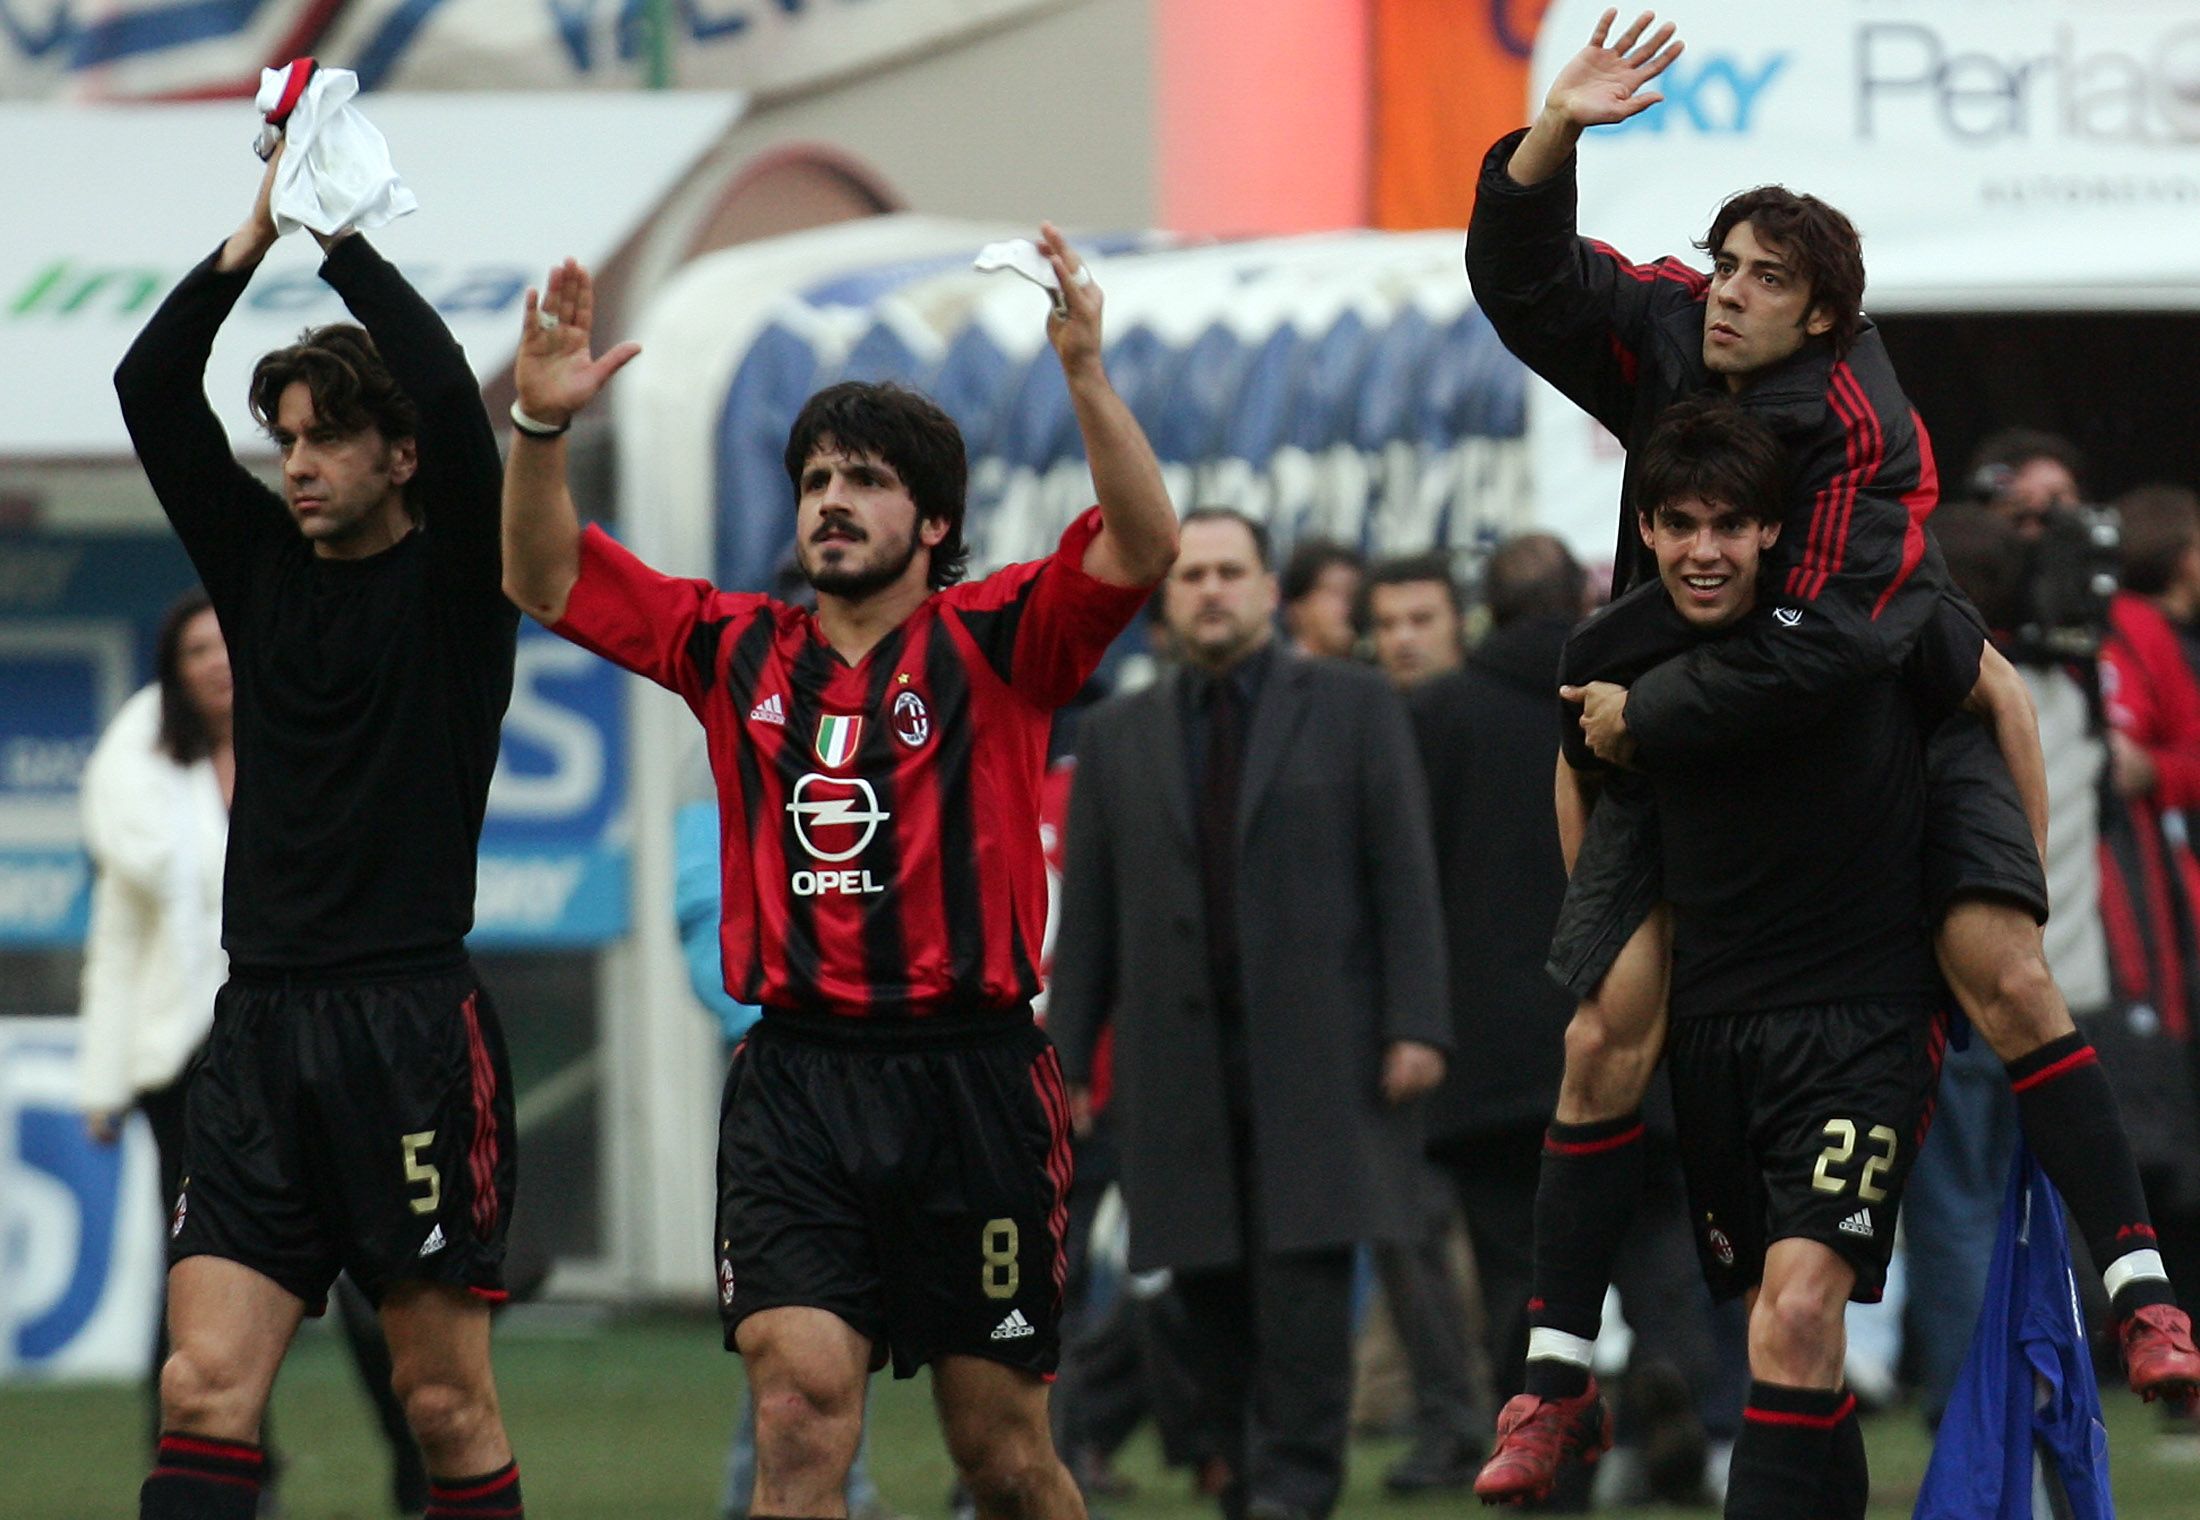 A.C. Milan's players (L-R) Alessandro Costacurta, Gennaro Gattuso, Manule Rui Costa (up) and Kaka' wave to the supporters at the end of the match against Sampdoria at San Siro stadium in Milan March 13, 2005. A.C. Milan won the match 1-0. REUTERS/Stefano Rellandini  SR/dbp